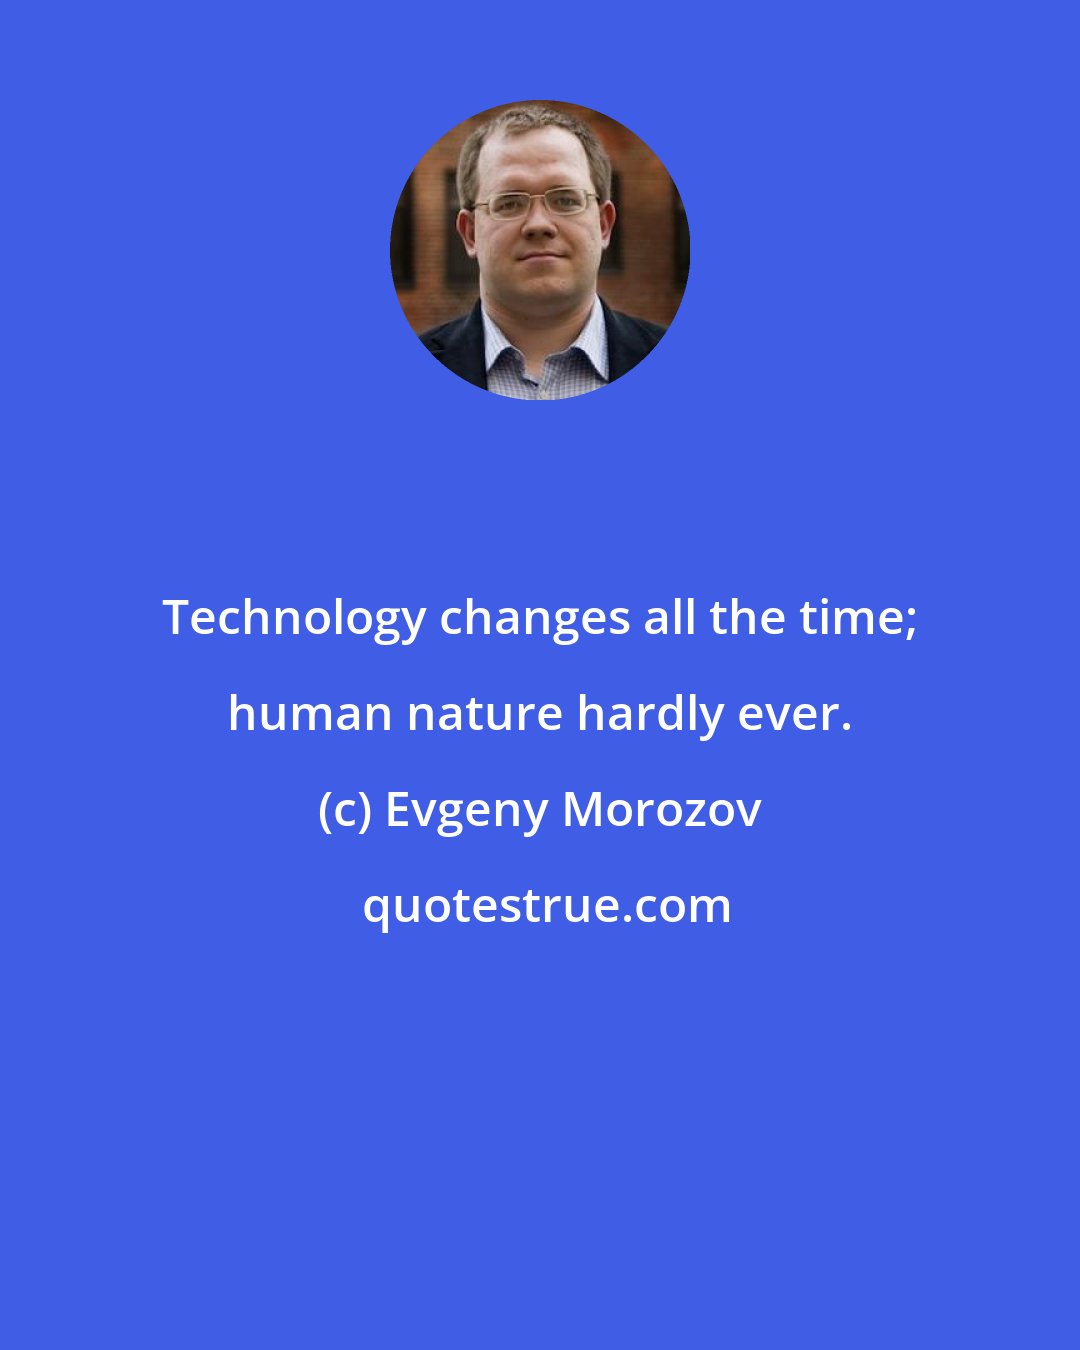 Evgeny Morozov: Technology changes all the time; human nature hardly ever.